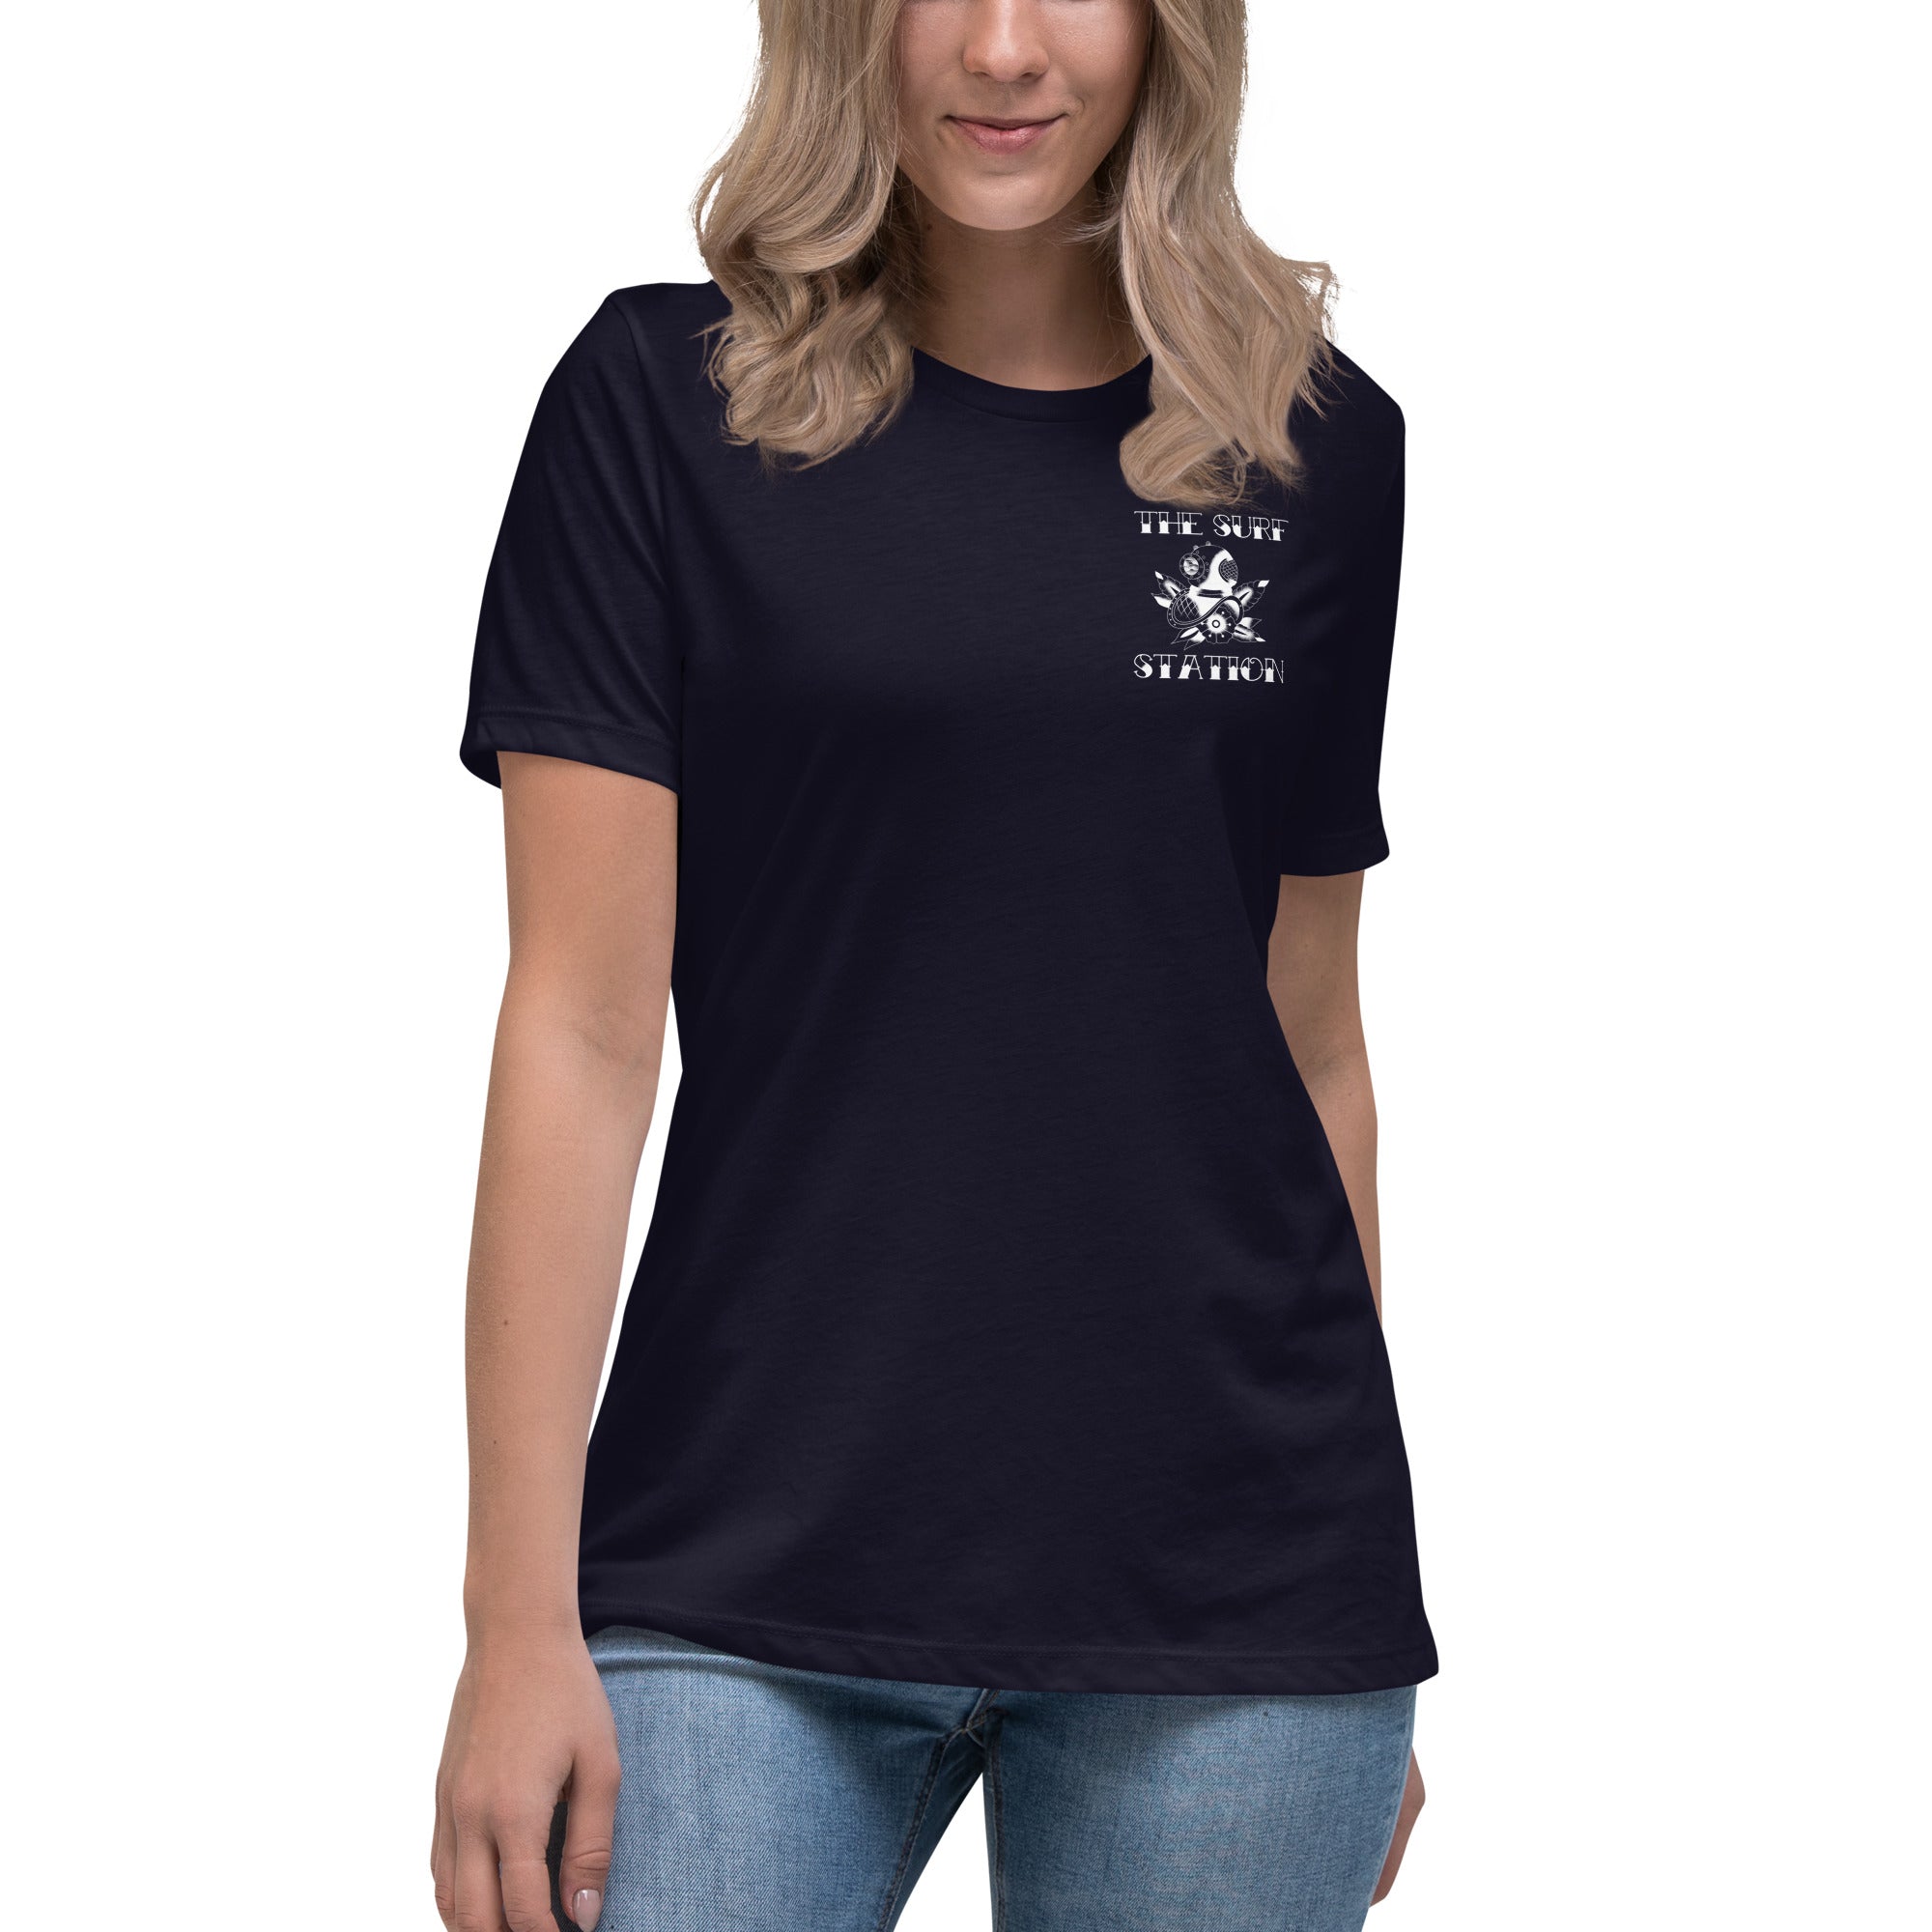 Surf Station x Darby Moore Sailor Tat White Women's Relaxed T-Shirt